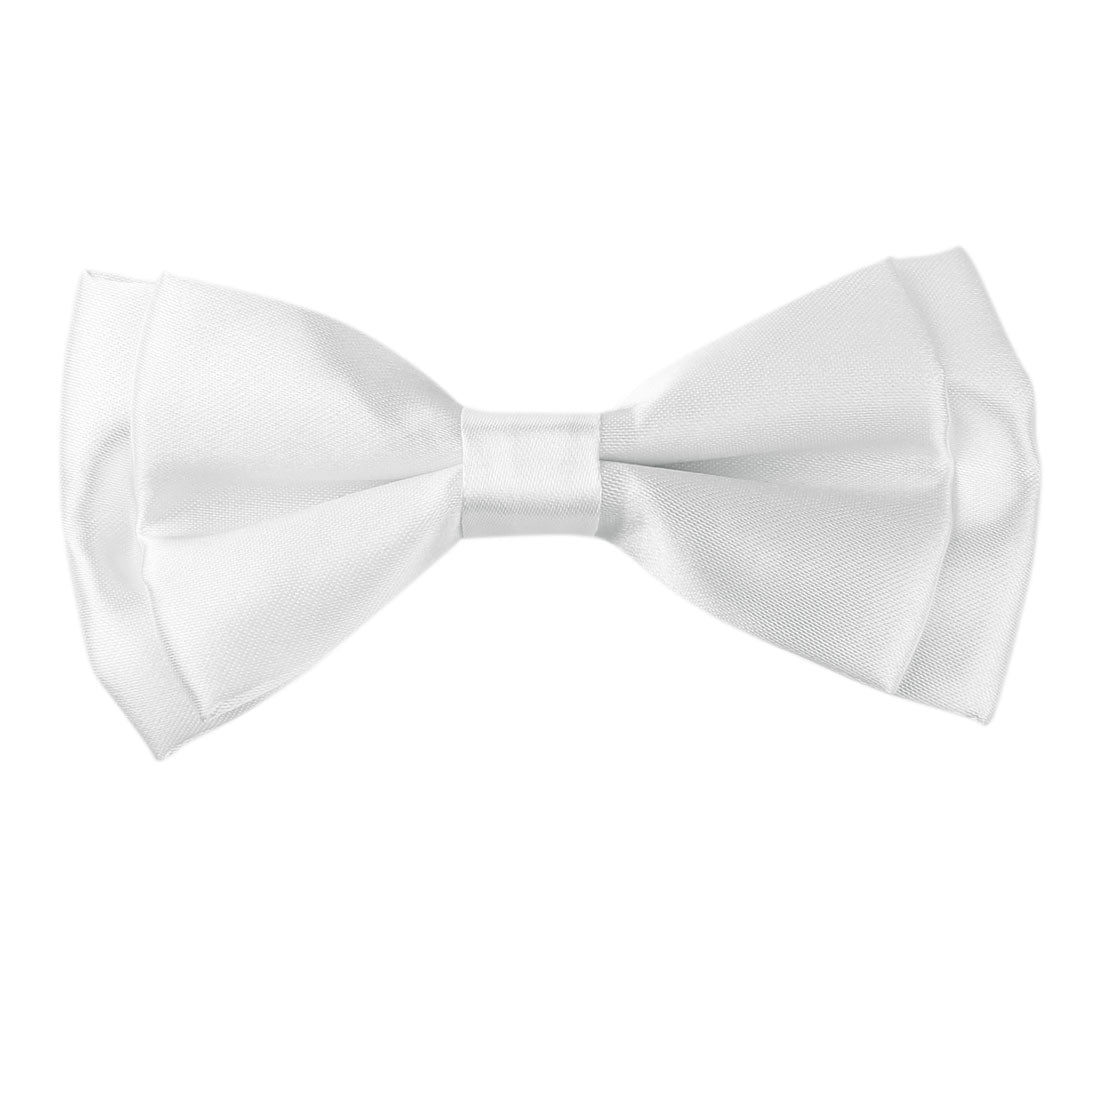 Allegra K Adjustable Pre-tied Solid Party Prom Tuxedo Bowknot Bowtie